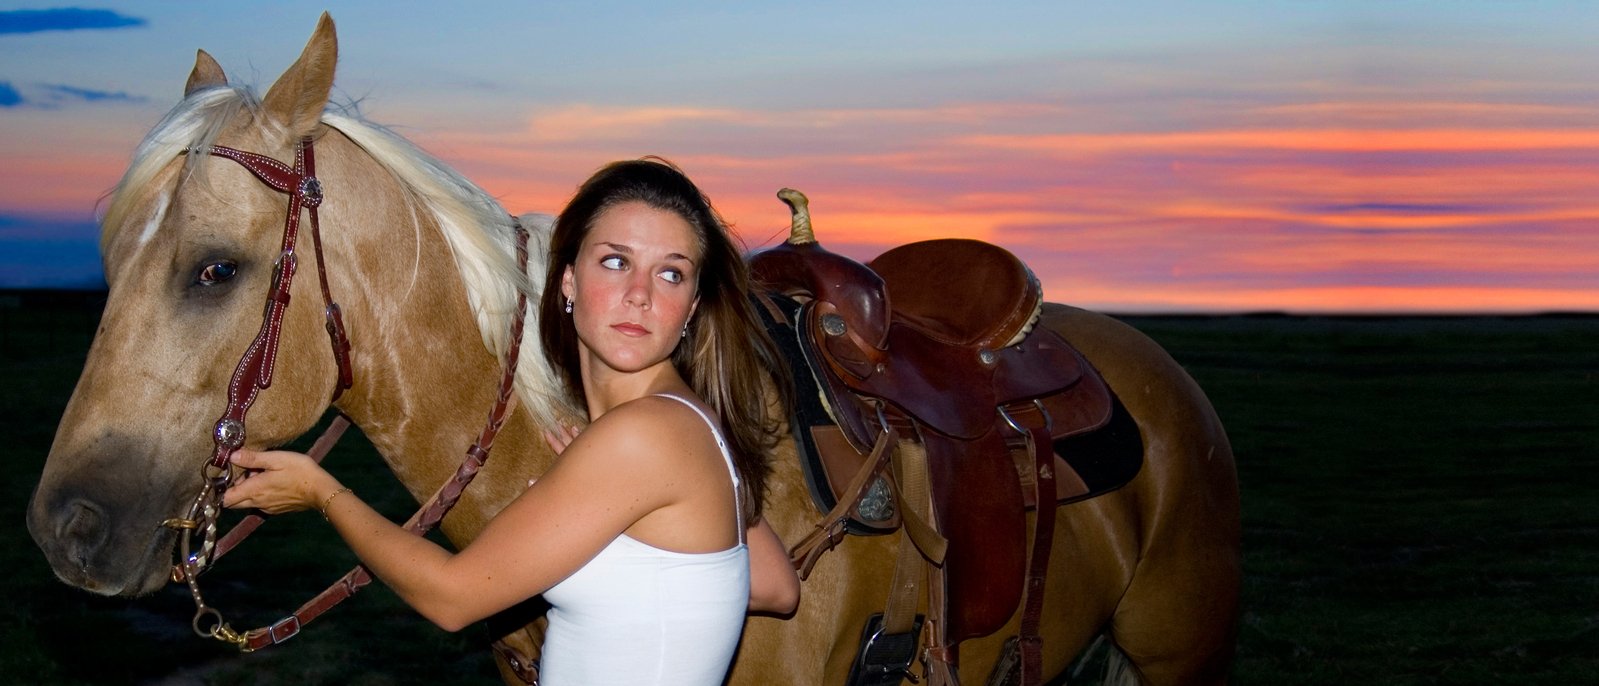 a pretty woman standing next to a horse at sunset